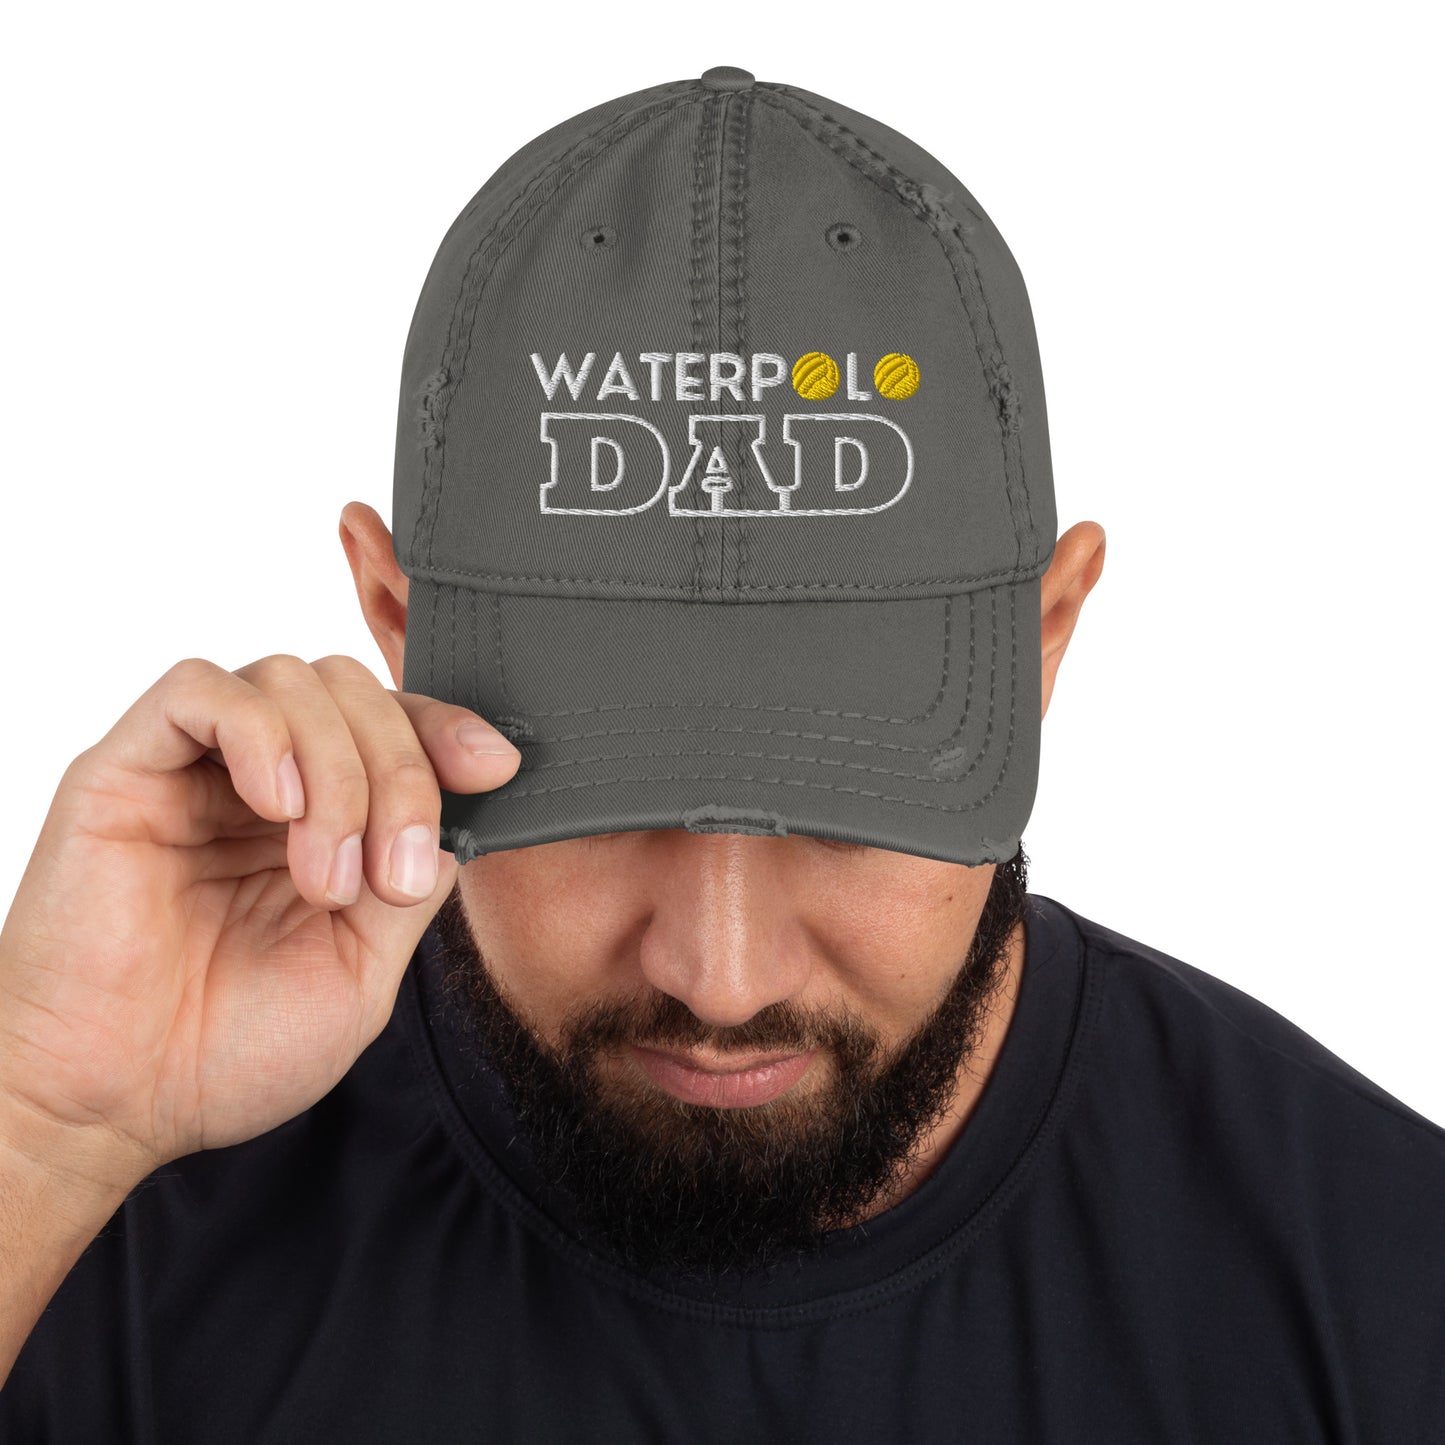 Waterpolo Dad - Embroidered Distressed Dad Hat | Otto Cap 104-1018